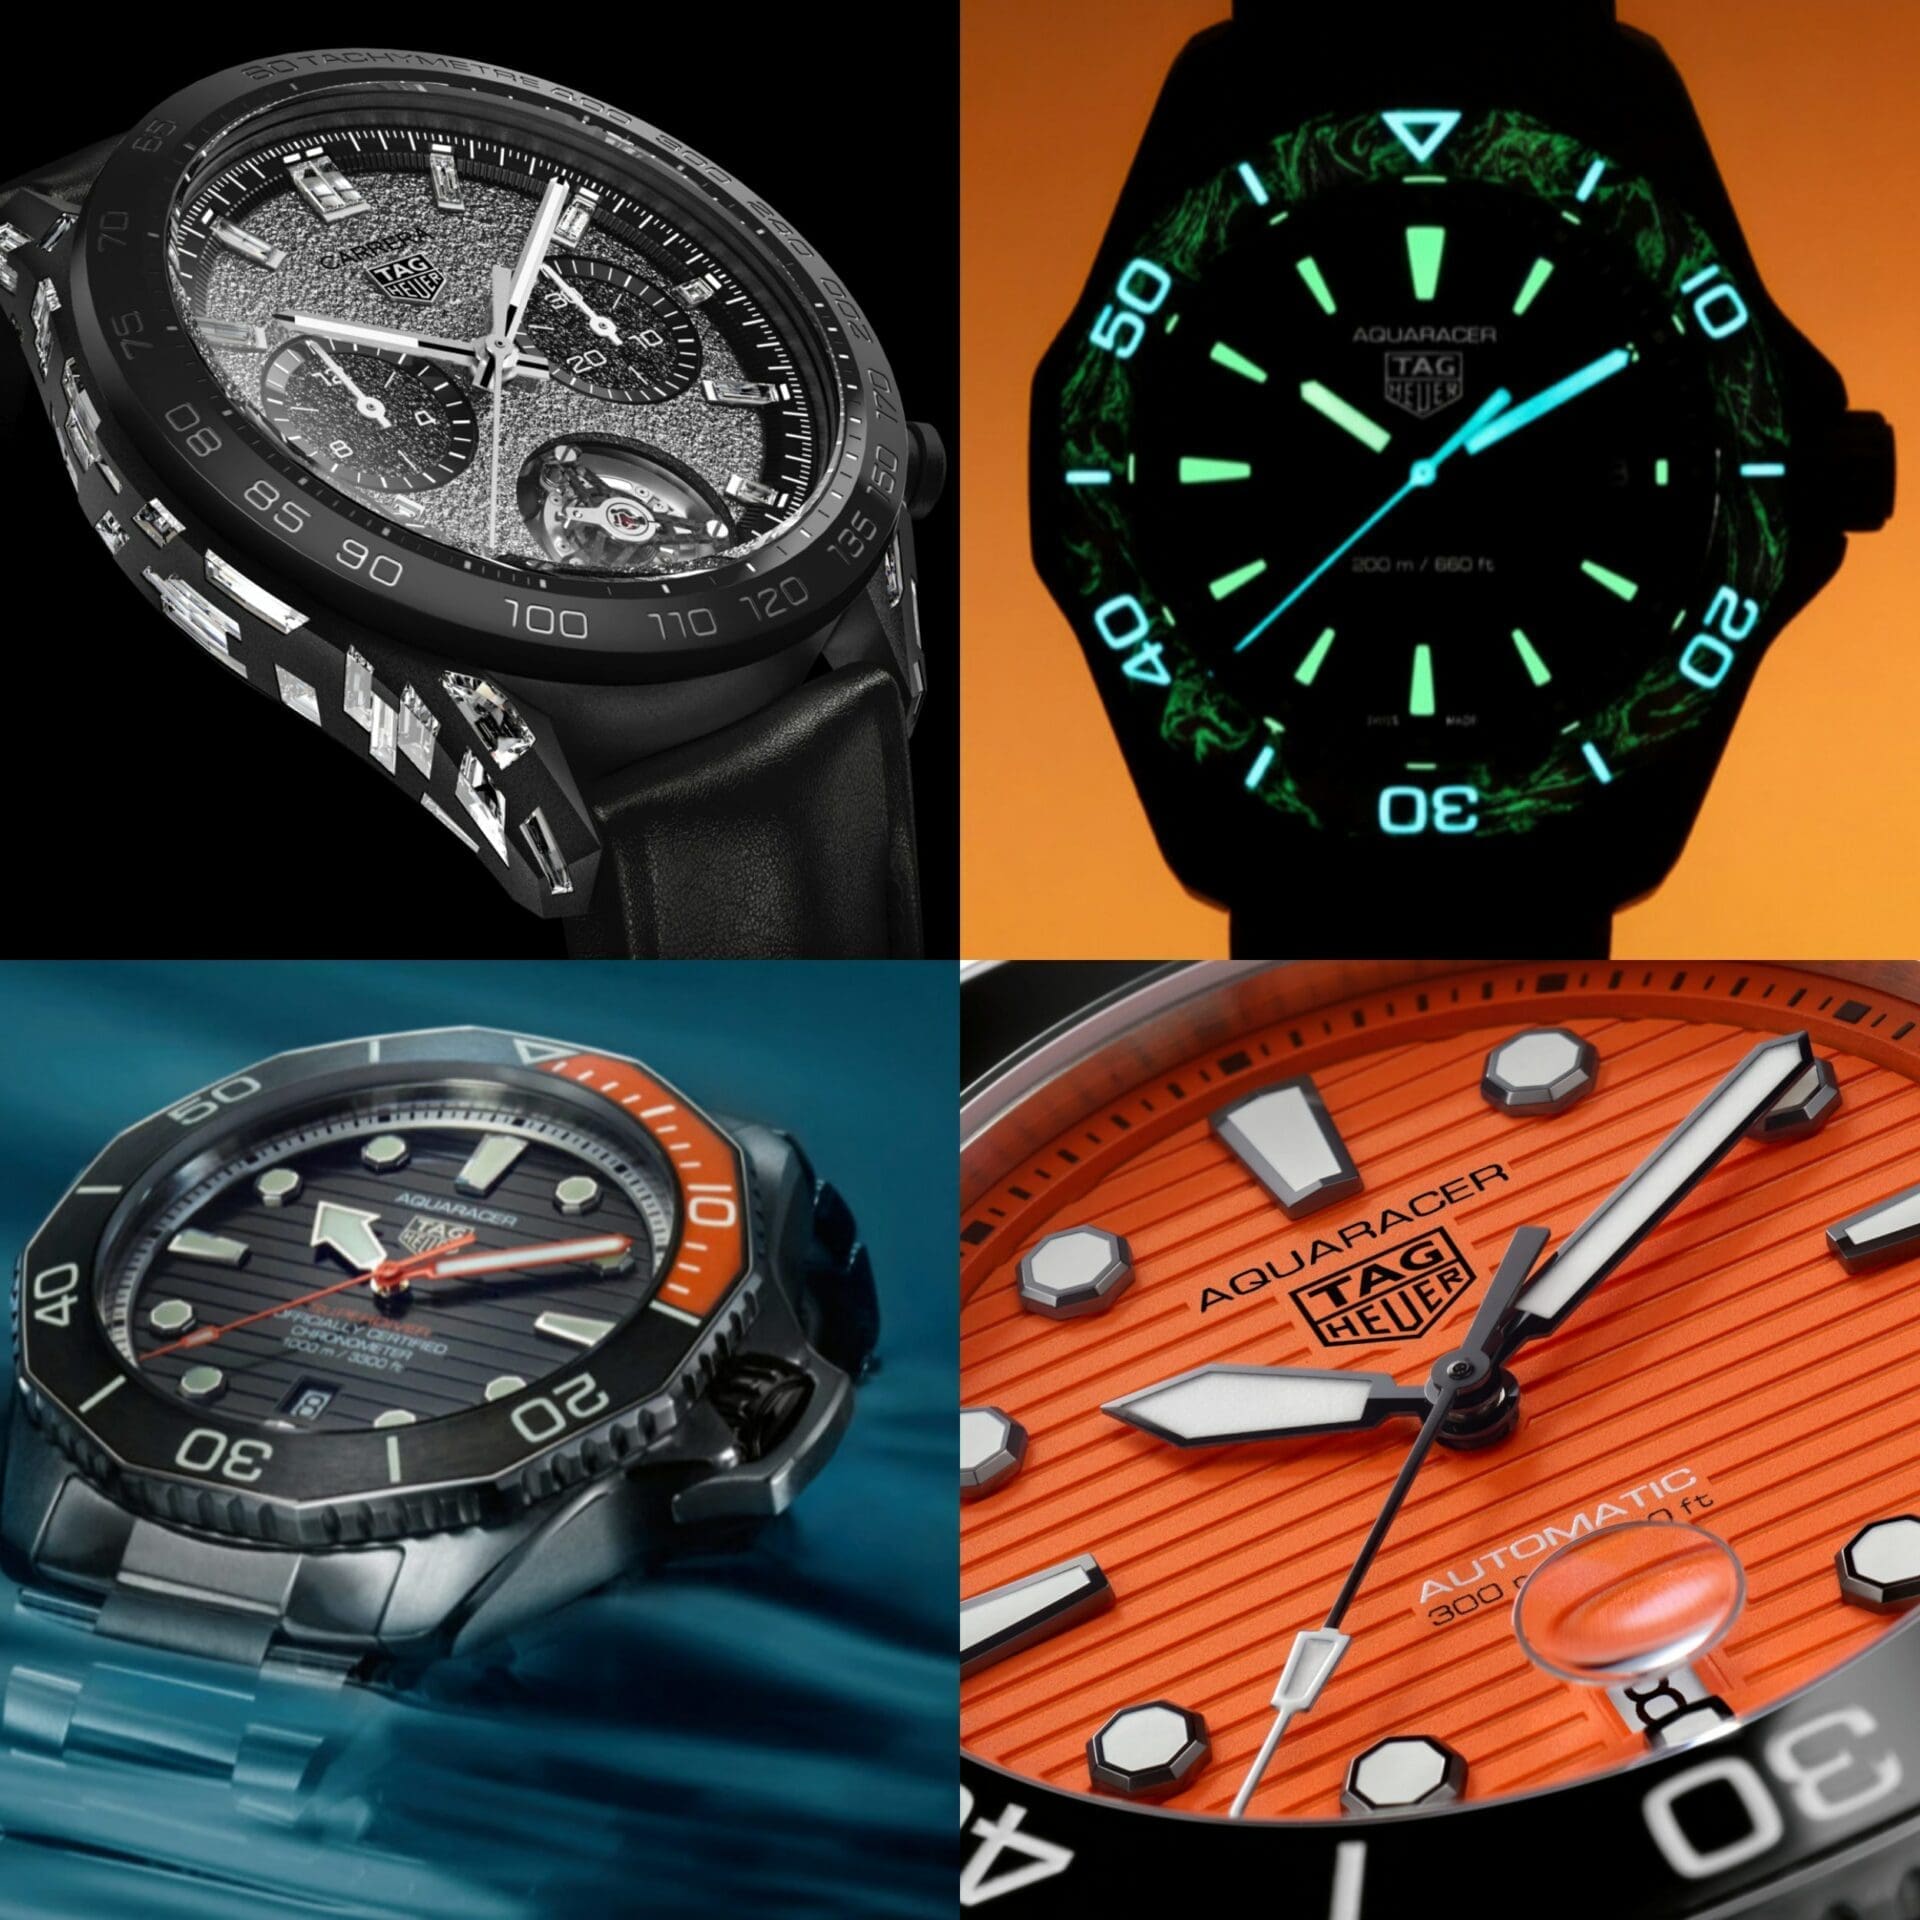 VIDEO: Unpacking the new TAG Heuer releases from lab-grown diamonds to serious divers